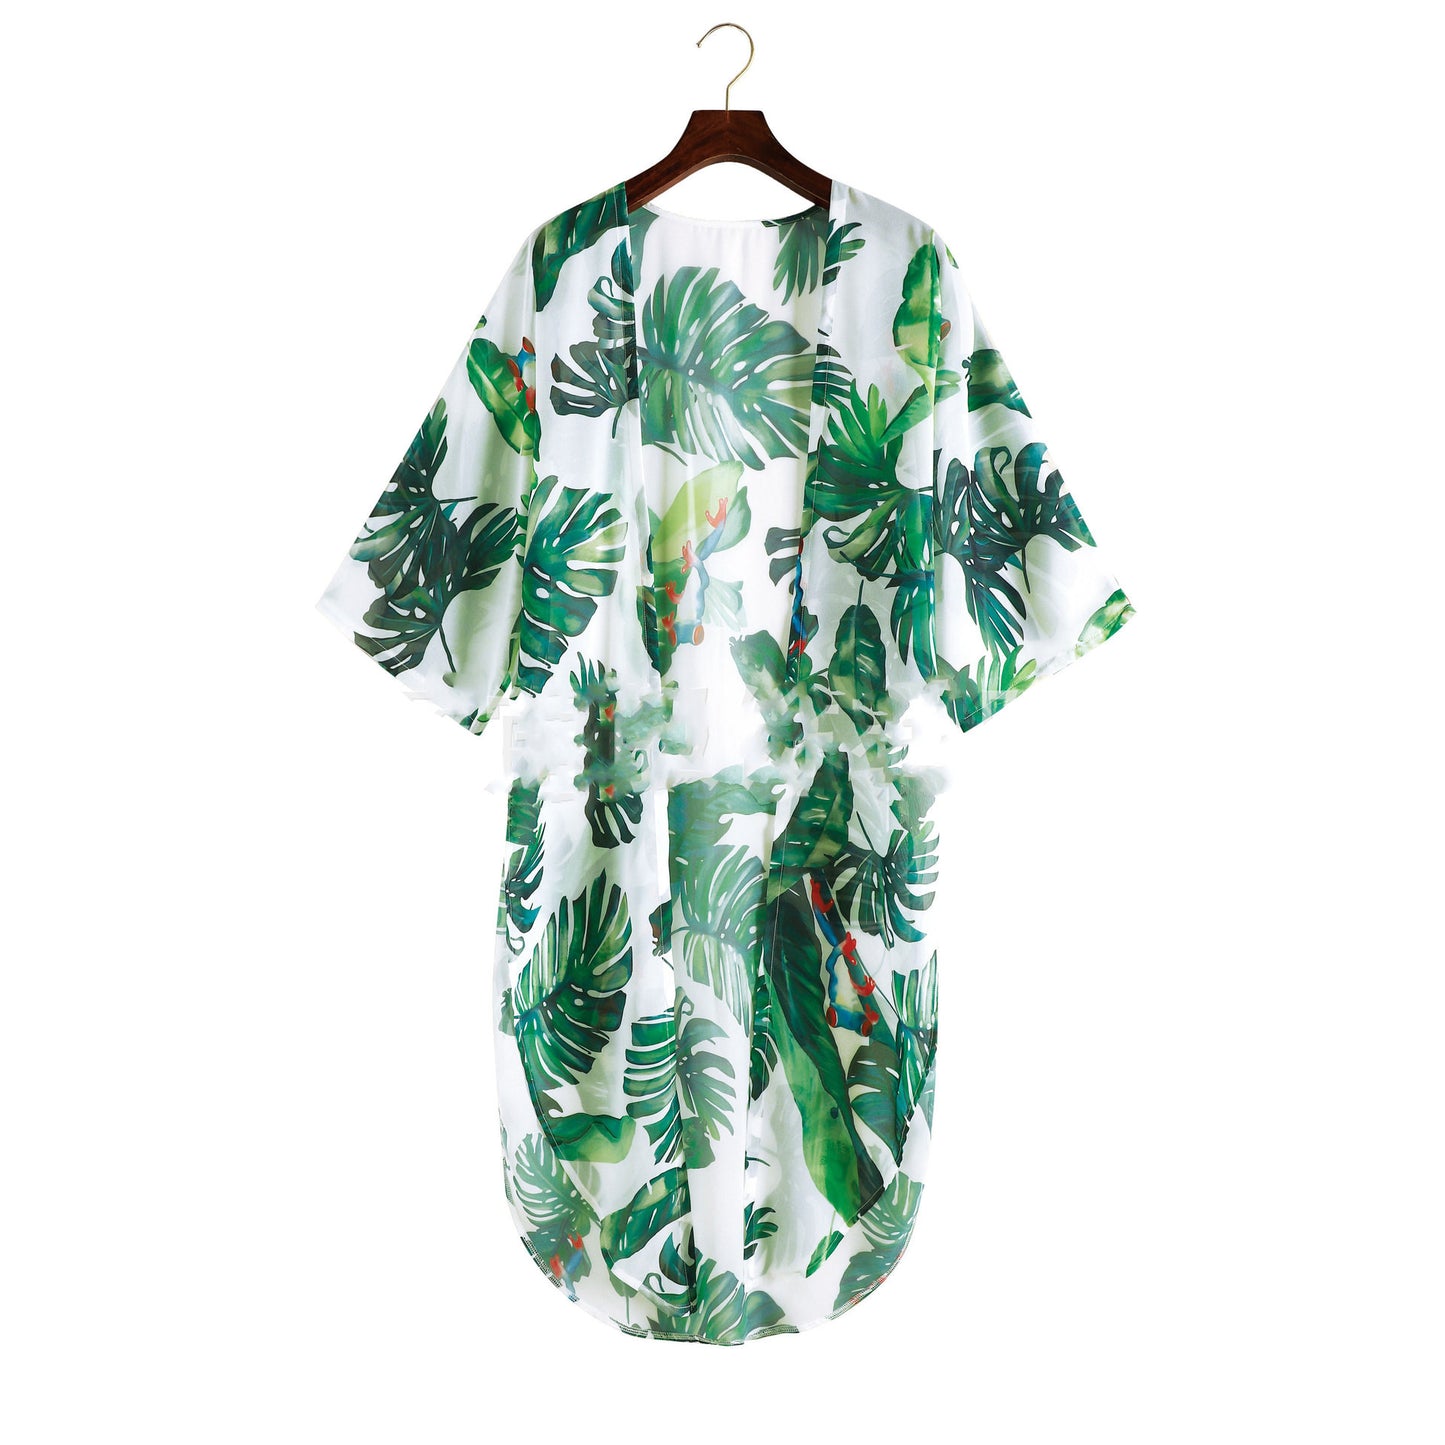 Summer Seaside Vacation Shirt (shipping to US, Canada & Europe, est. delivery 10-18 business days)